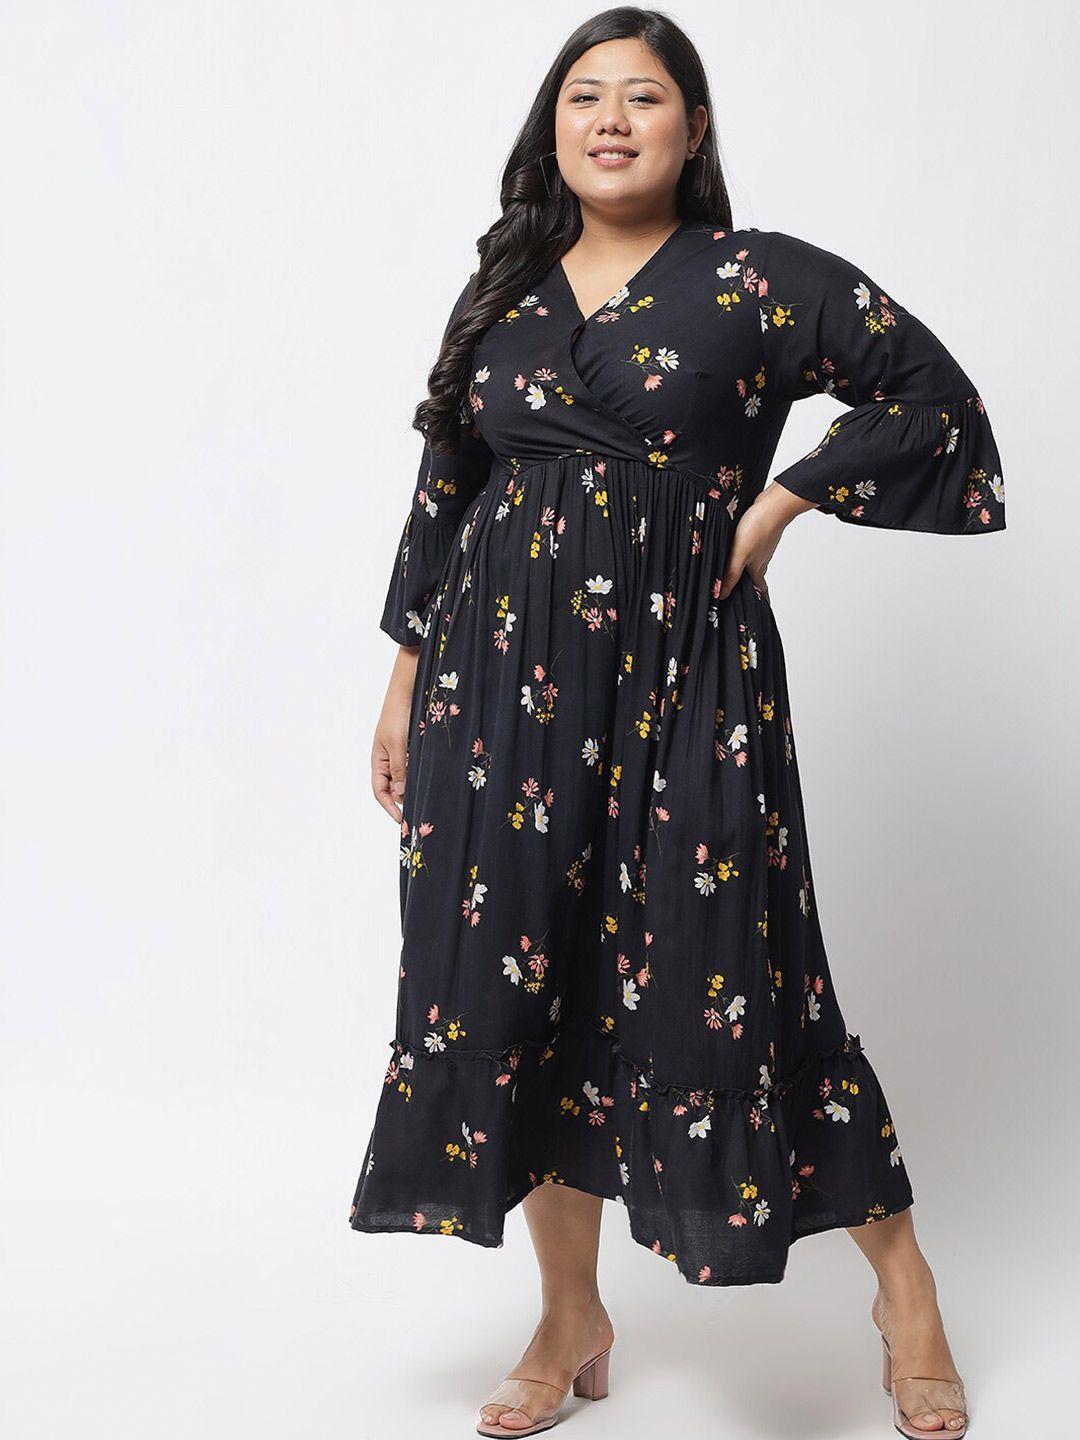 beyound size - the dry state women plus size black & red floral maxi dress